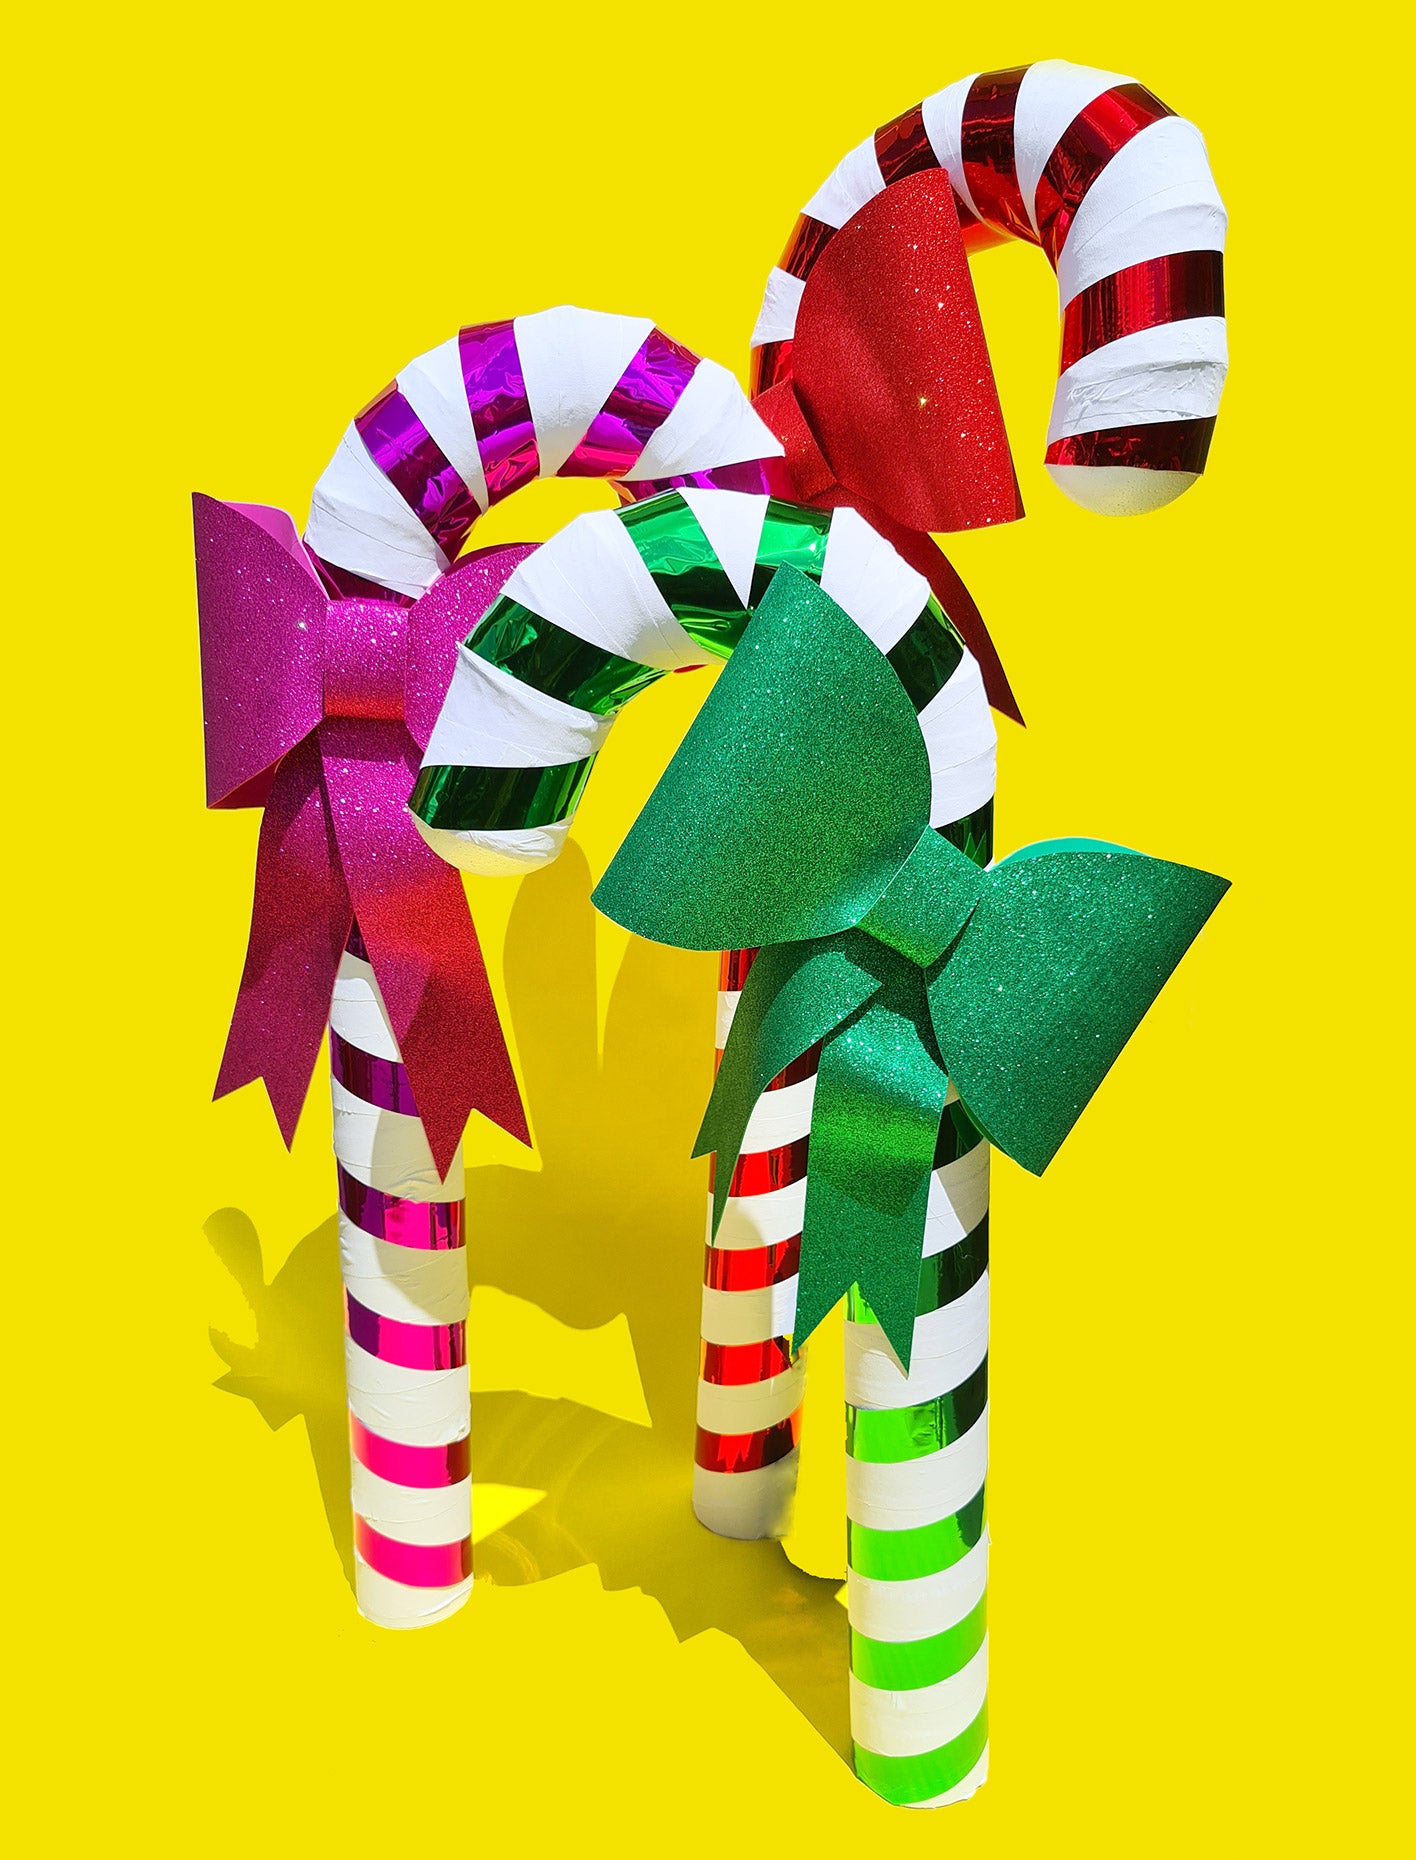 Three giant handmade candy cane Christmas props in pink, red and green sit on a yellow background, each with a matching glittery bow.